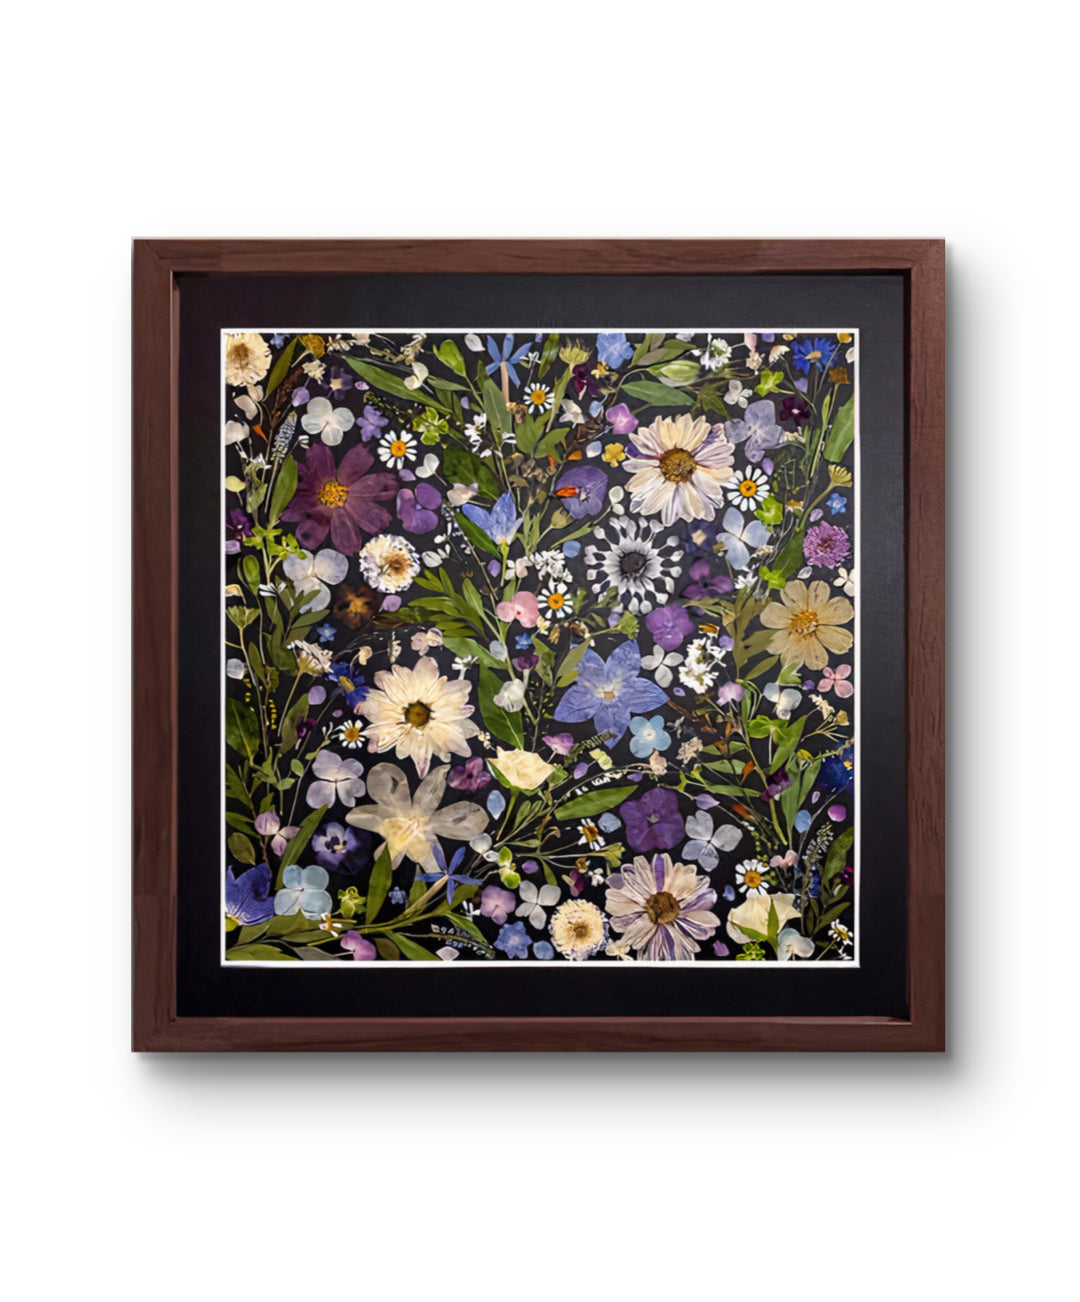 pressed flower frame art for wall decoration,, abstract style on black background  